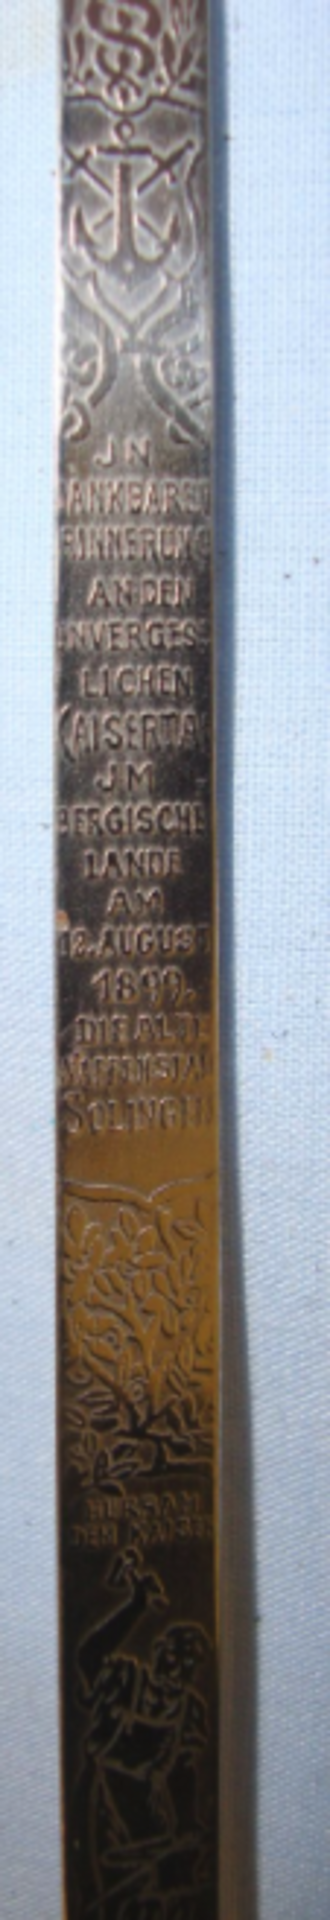 Imperial German 1899 Dated 'Sword Manufacturer's Sample' Miniature Kaiserliche Marine Naval - Image 2 of 3